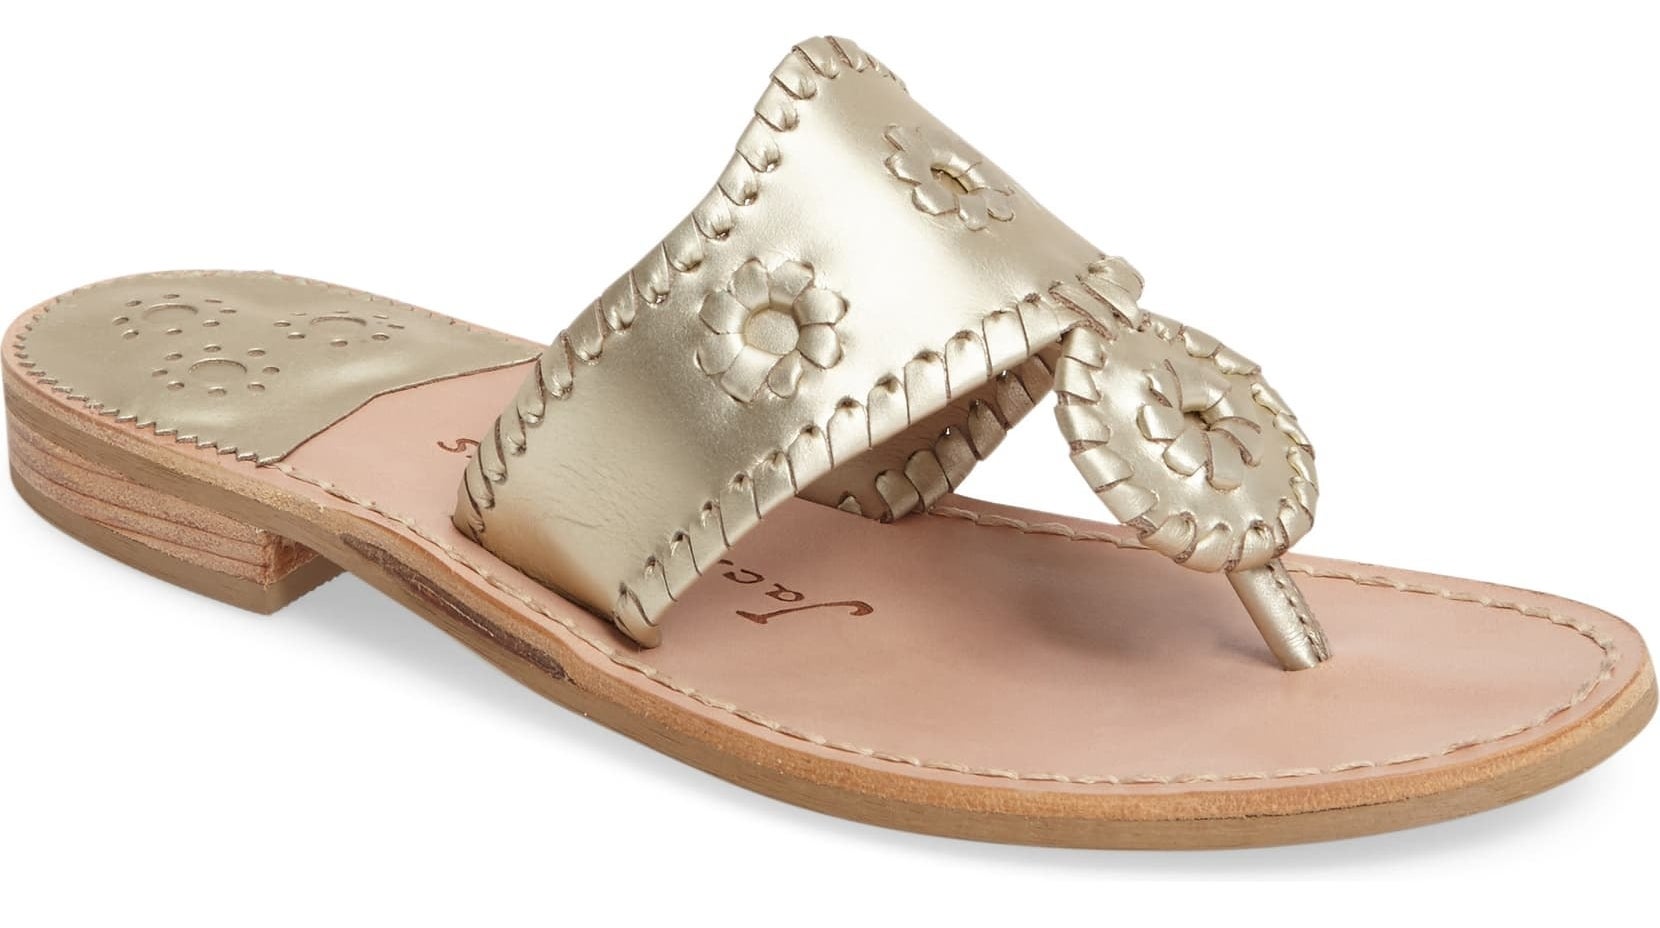 The Jack Rogers Whipstitched Flip Flop in platinum. 